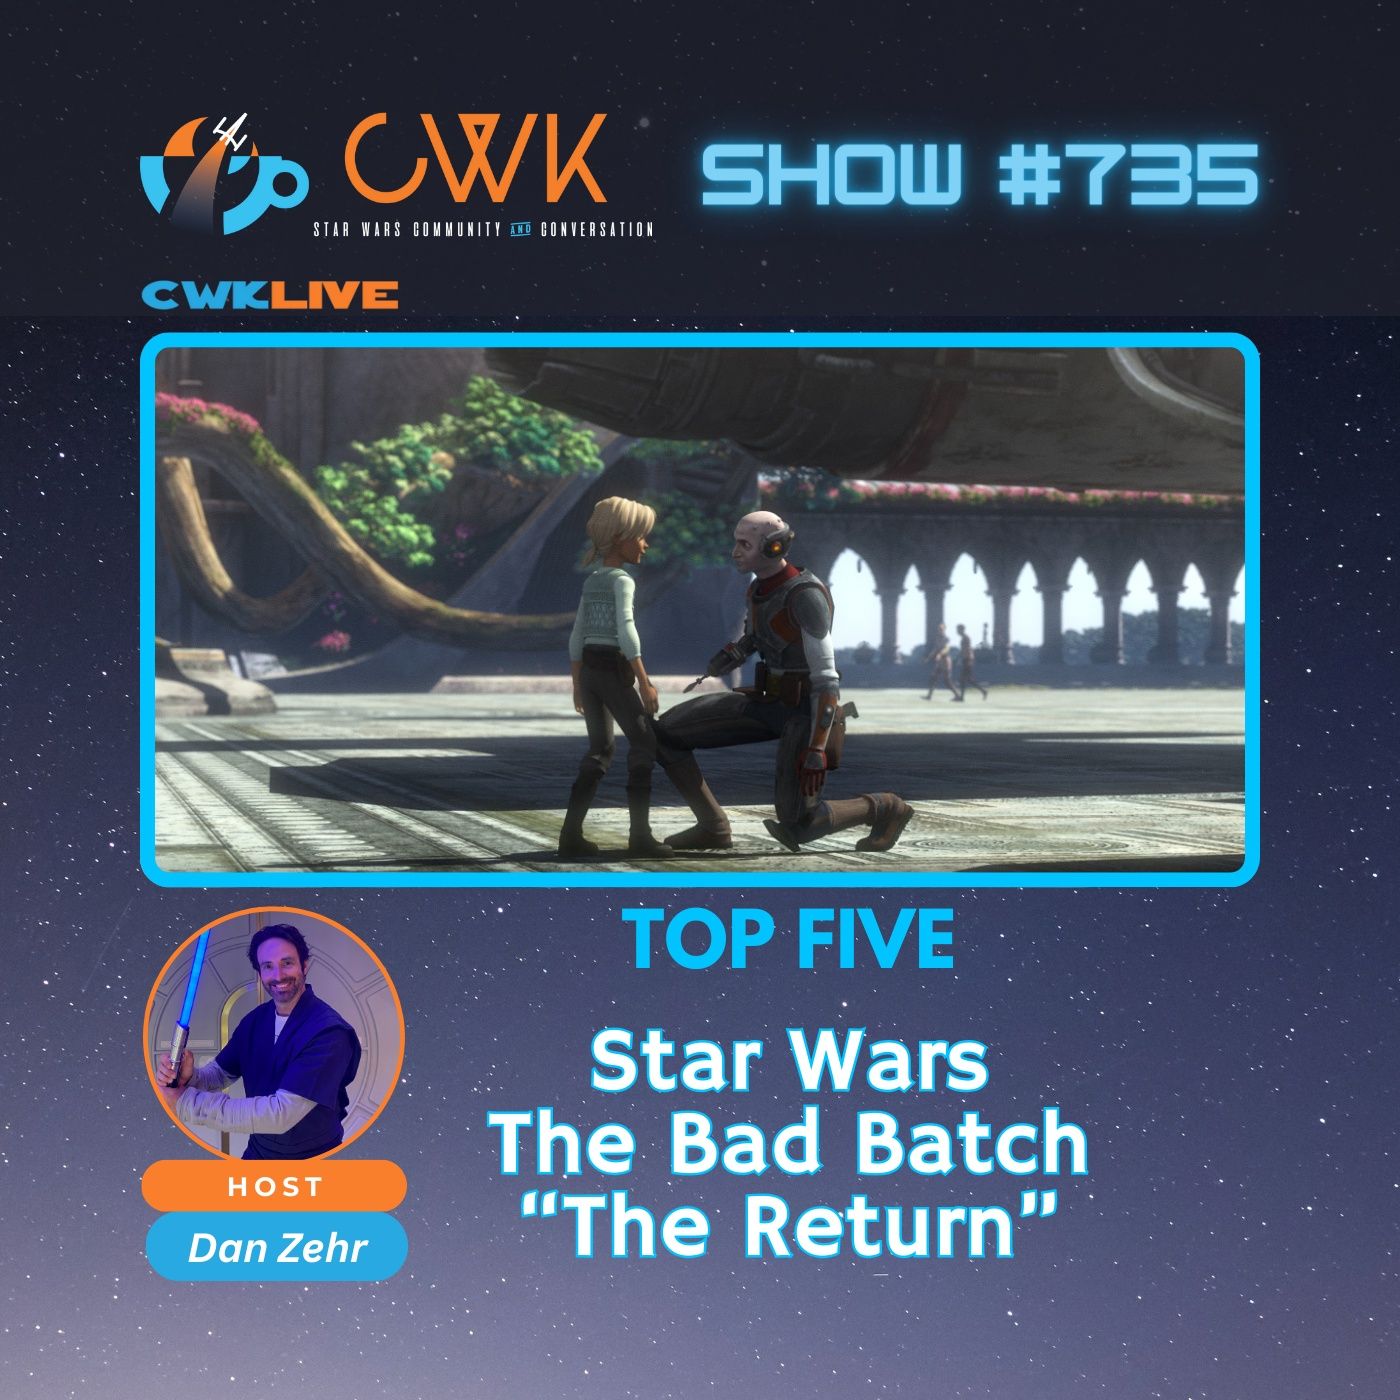 CWK Show #735 LIVE: Top Five Moments from The Bad Batch "The Return"